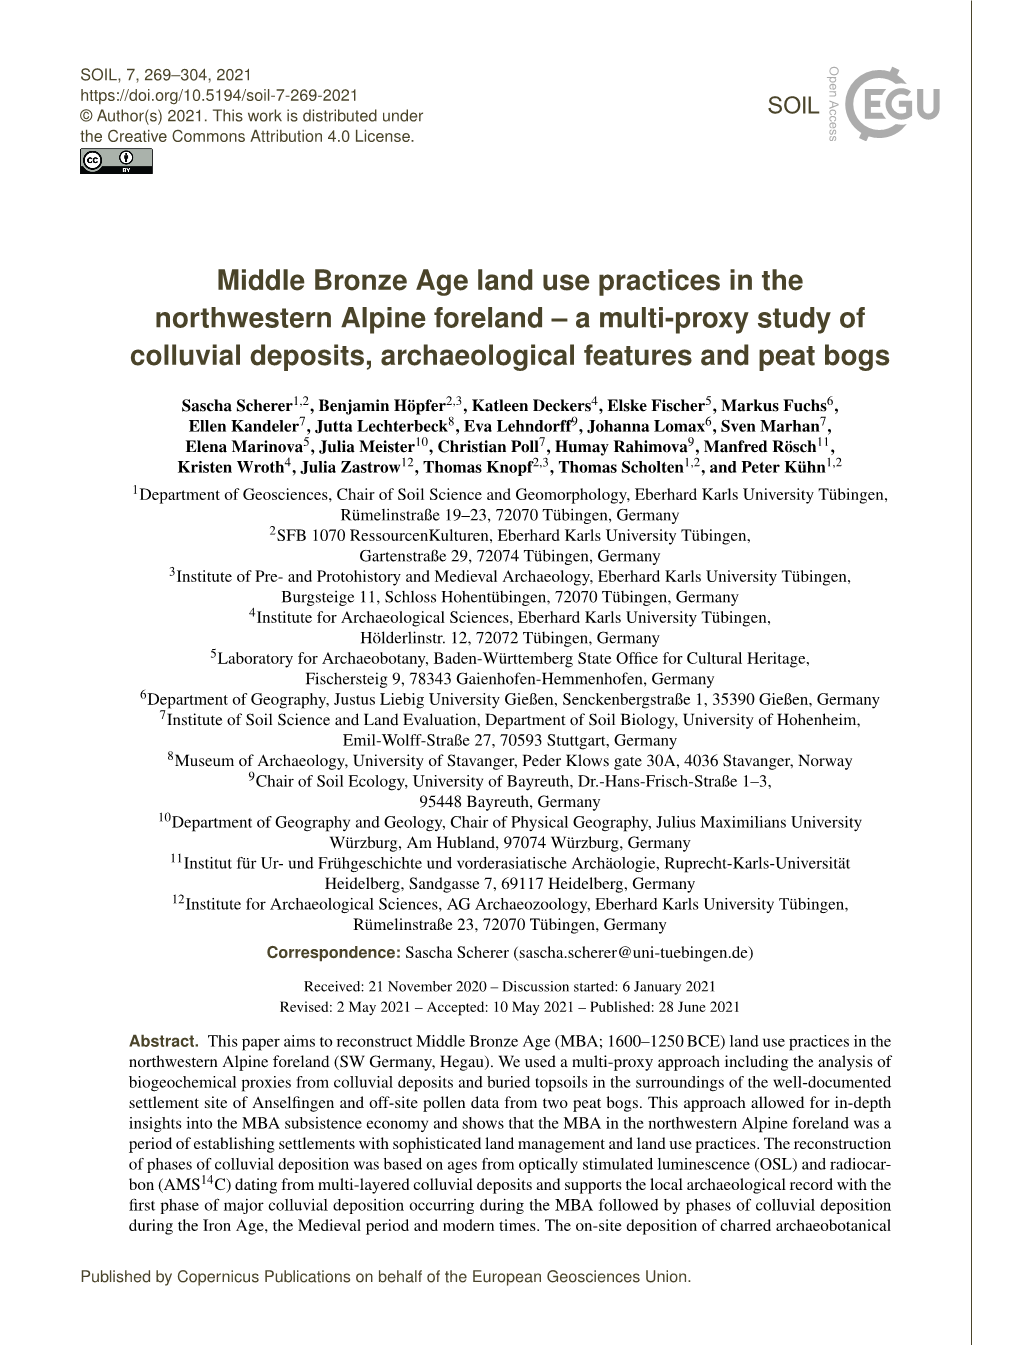 Middle Bronze Age Land Use Practices in the Northwestern Alpine Foreland – a Multi-Proxy Study of Colluvial Deposits, Archaeological Features and Peat Bogs